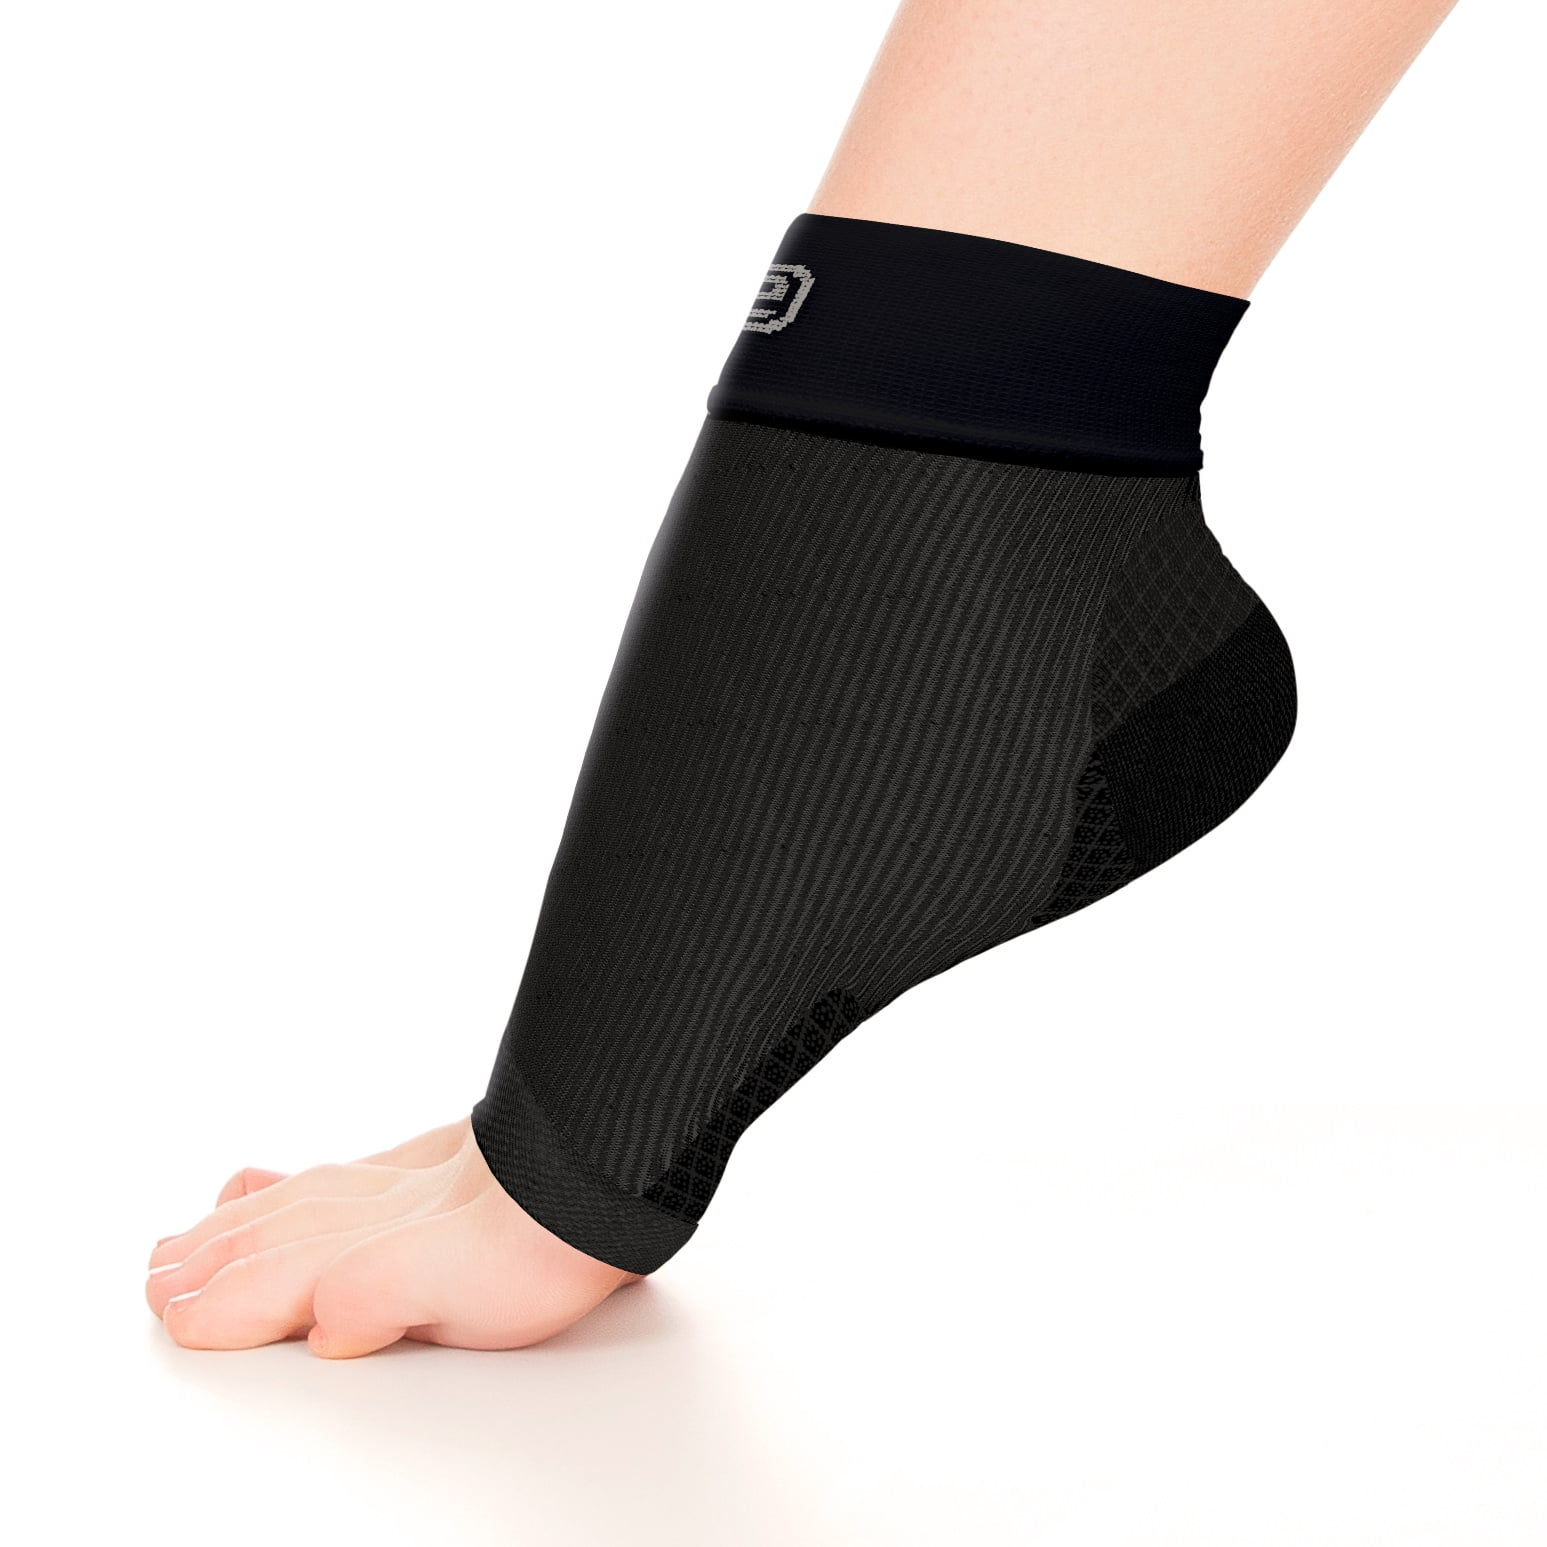 foot supports